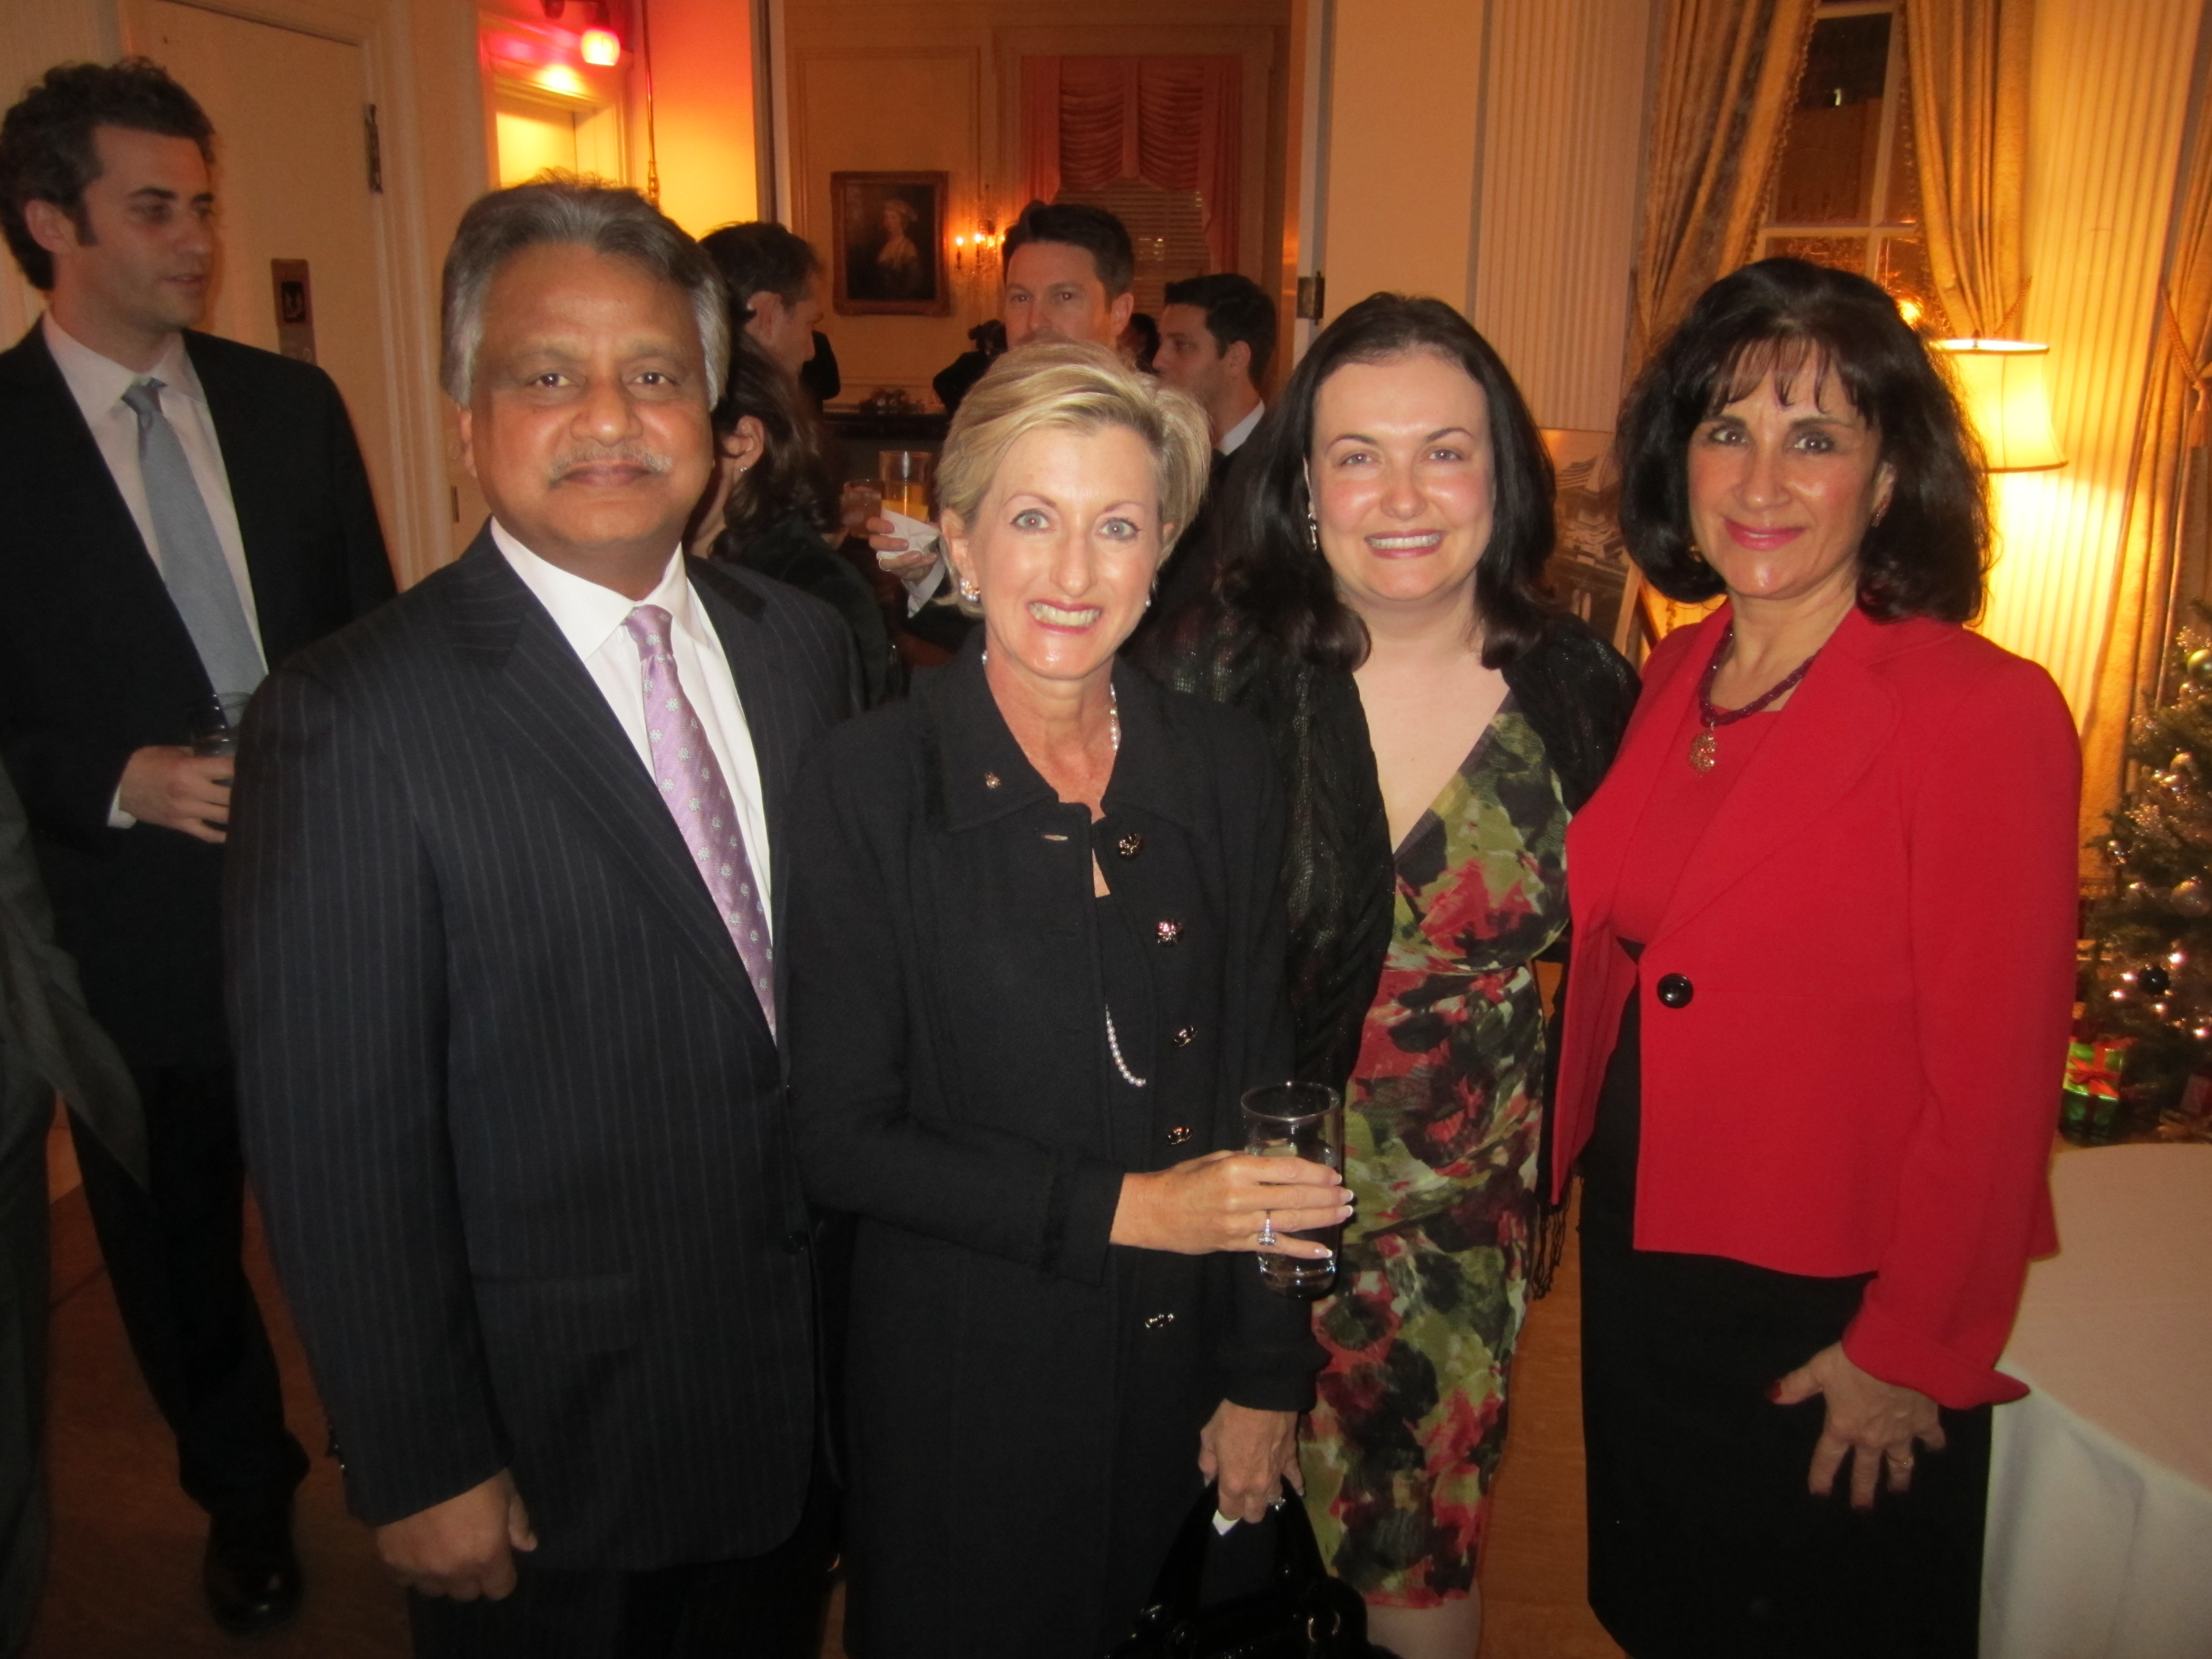 Inside the Diplomatic Courier Holiday Diplomacy Party